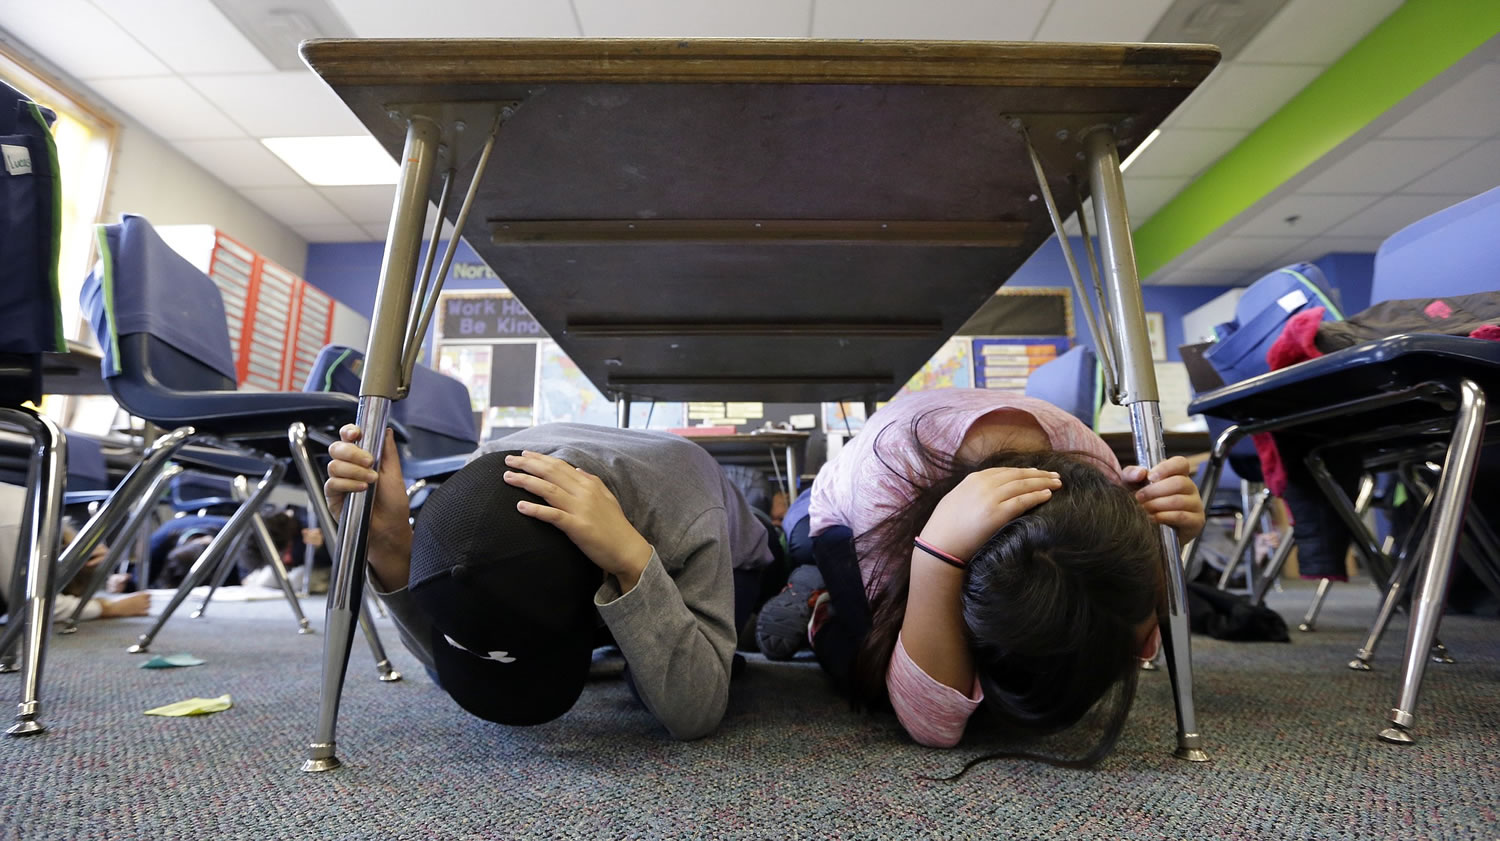 Fourth-graders huddle under a desk Thursday during the Great Washington Shakeout drill at West Woodland Elementary School in Seattle. Thousands of students across the state practiced ducking under desks in the coordinated drill.